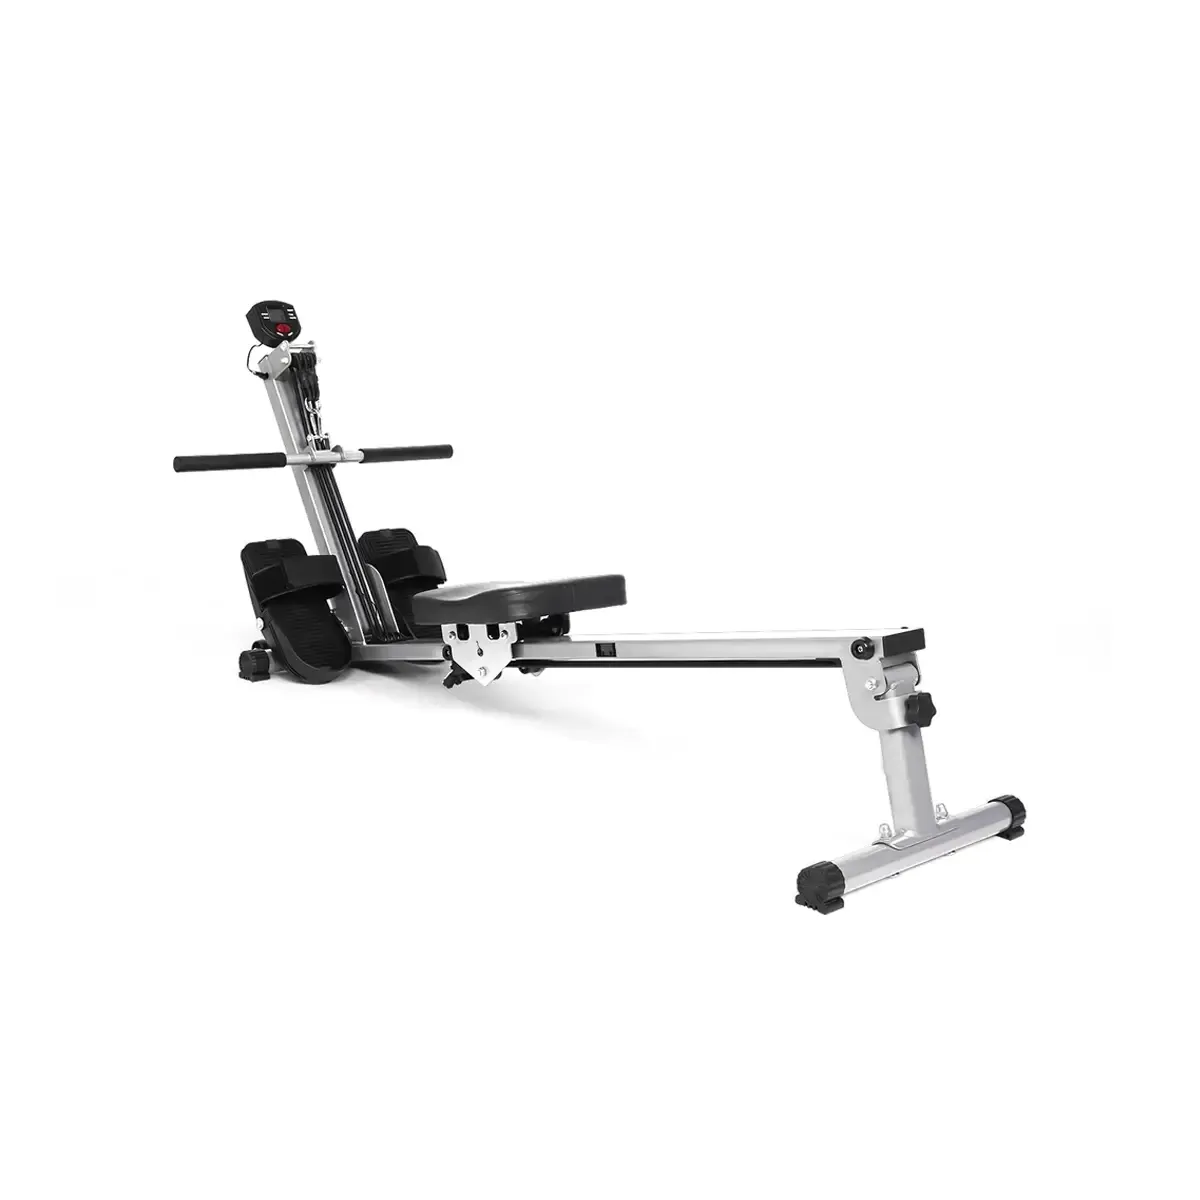 Tousains foldable rowing machine in silver